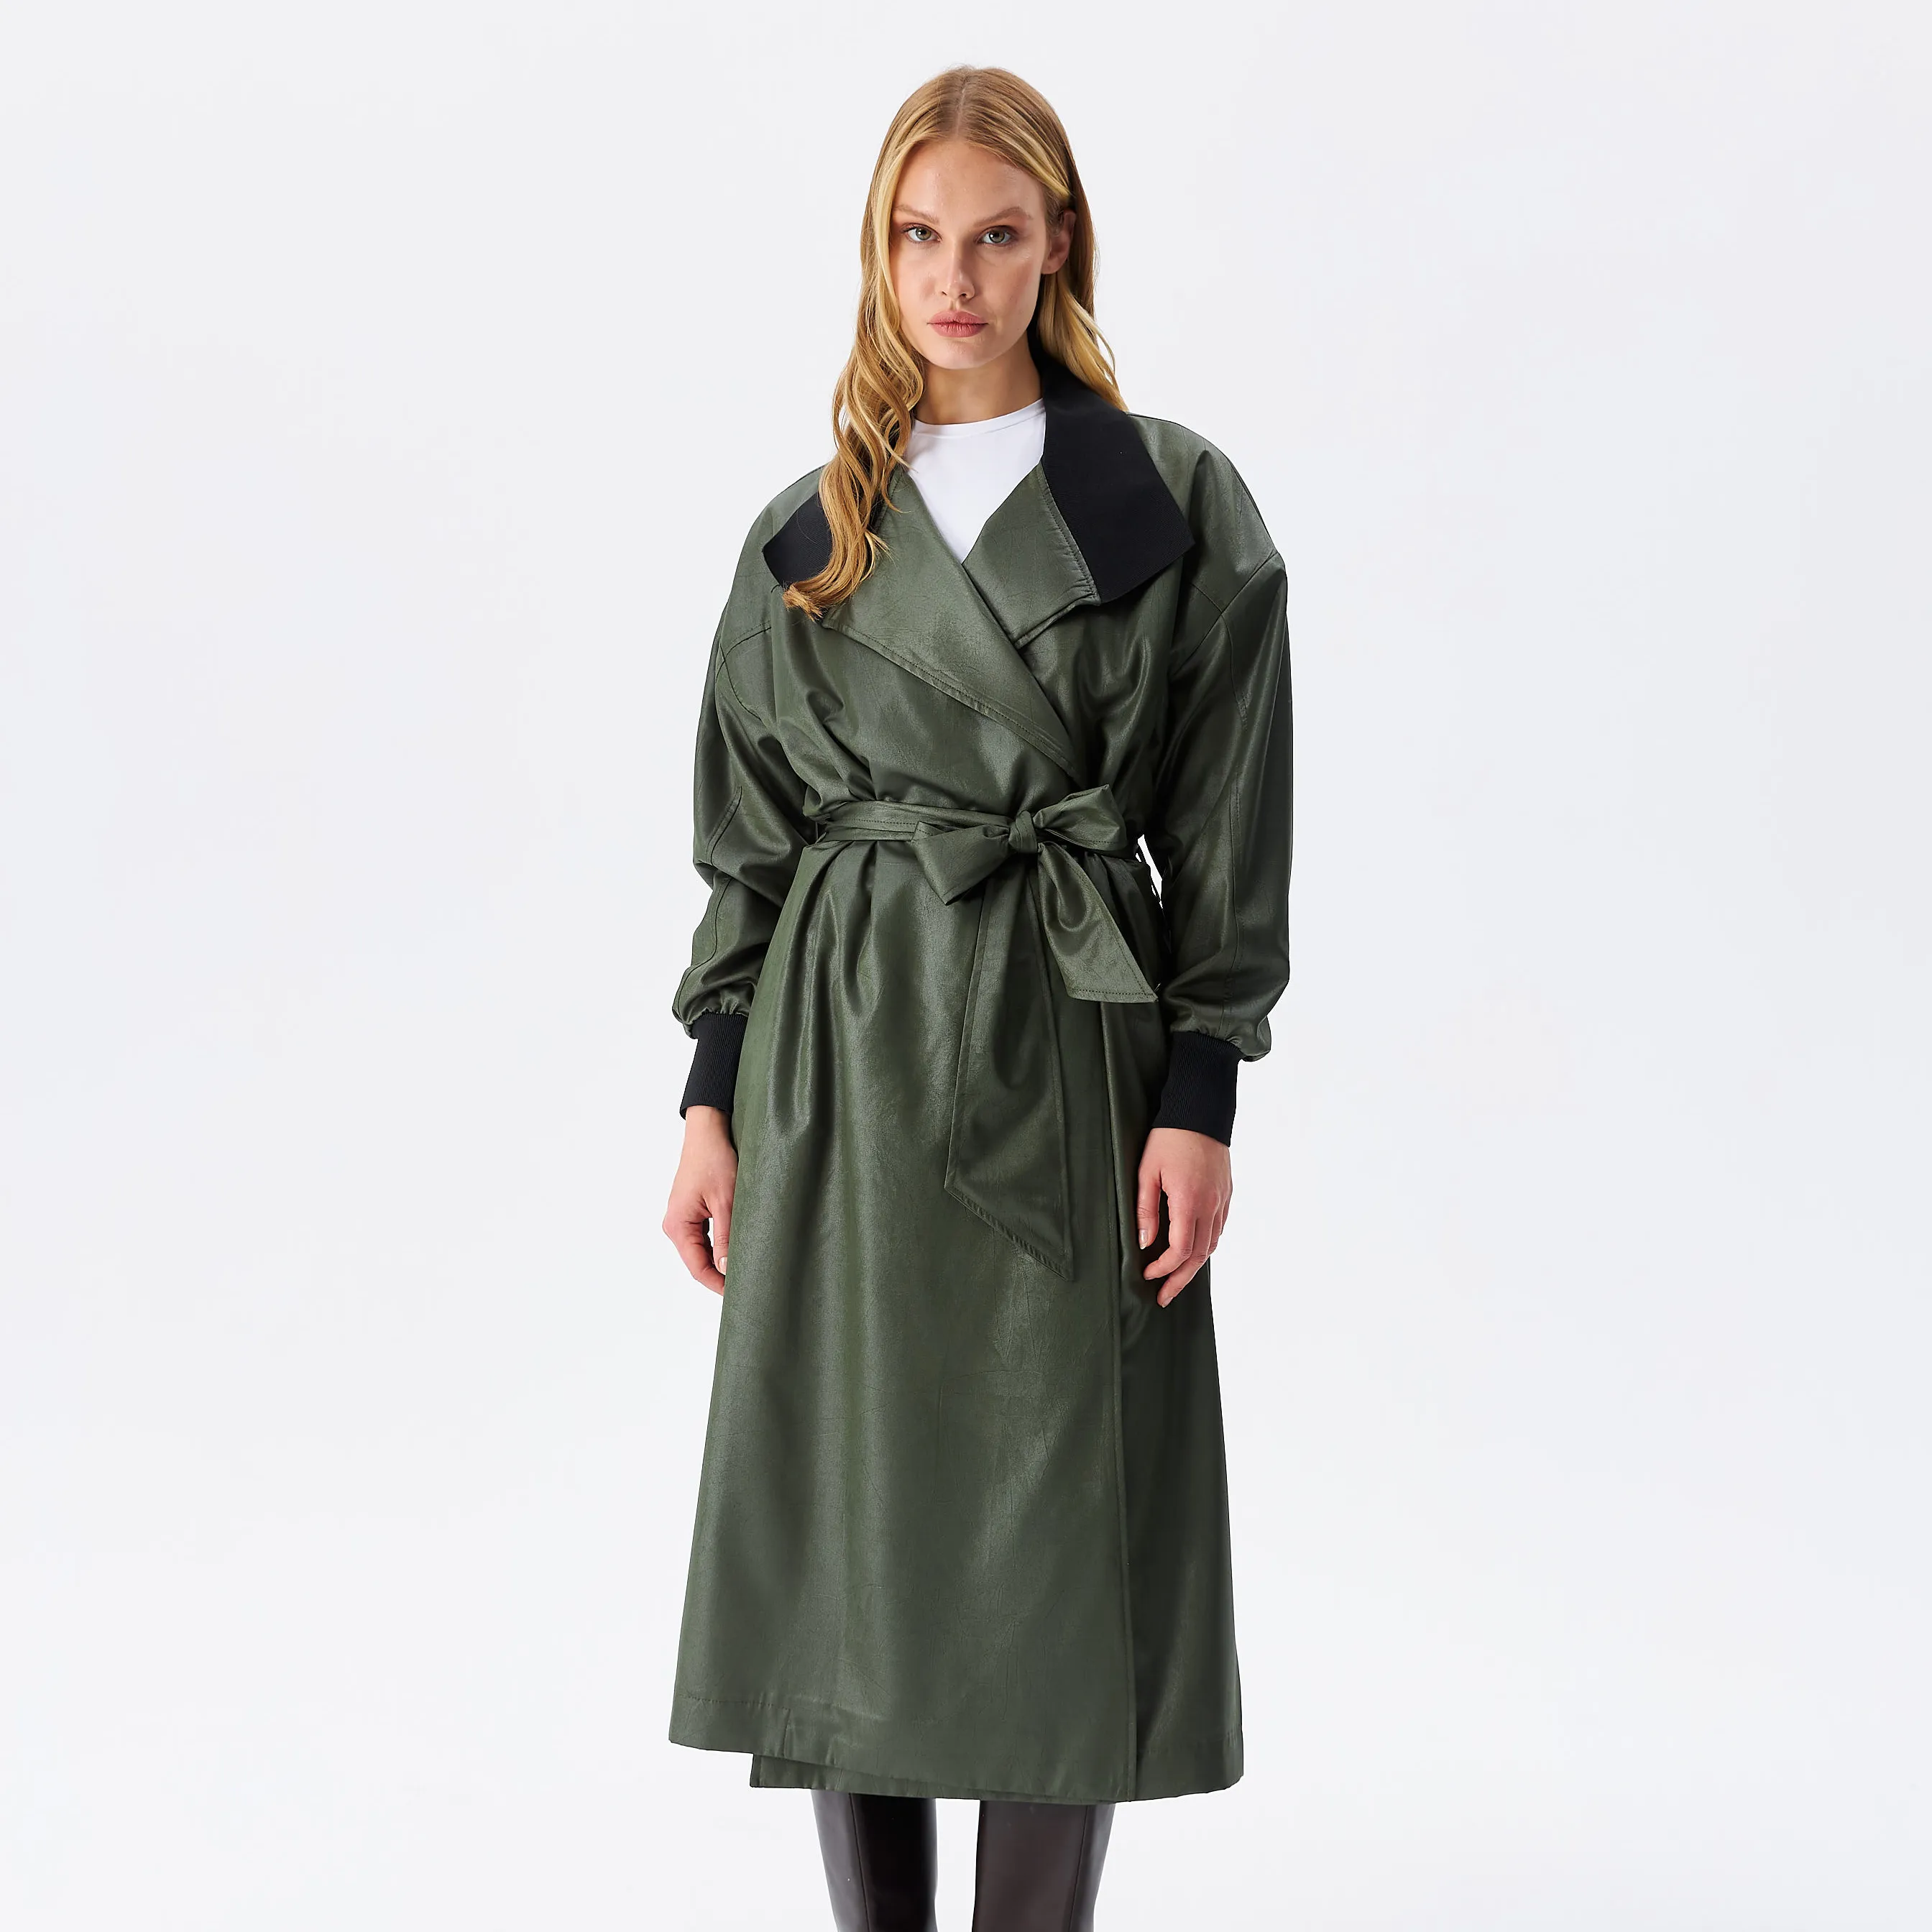 2023 New Model Matton High Quality Khaki Belted Trench Women's Trench Coat Collar Detailed